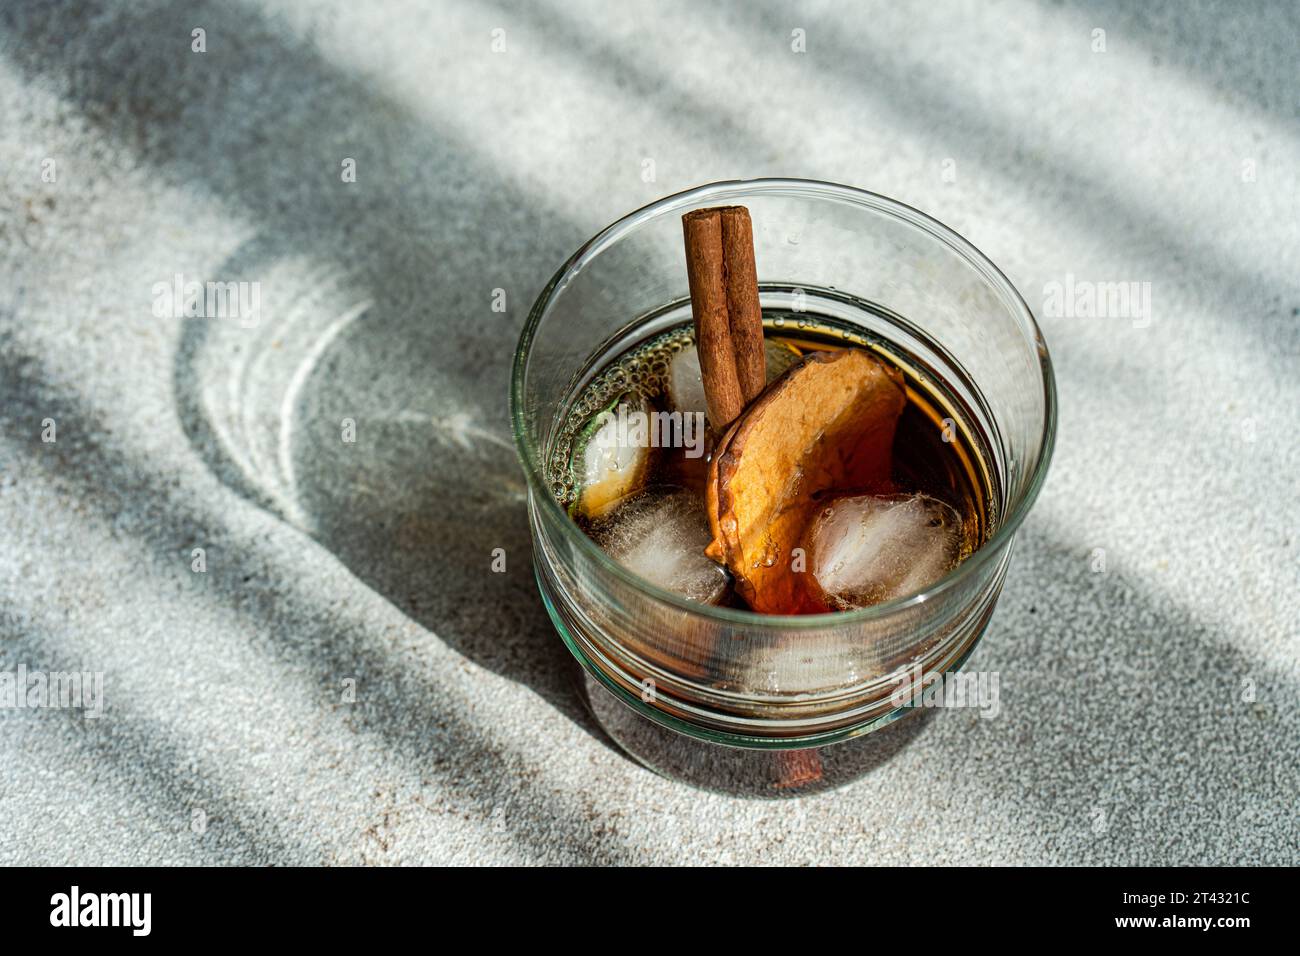 Apple cider cocktail with dried apple slices and a cinnamon stick on a table Stock Photo